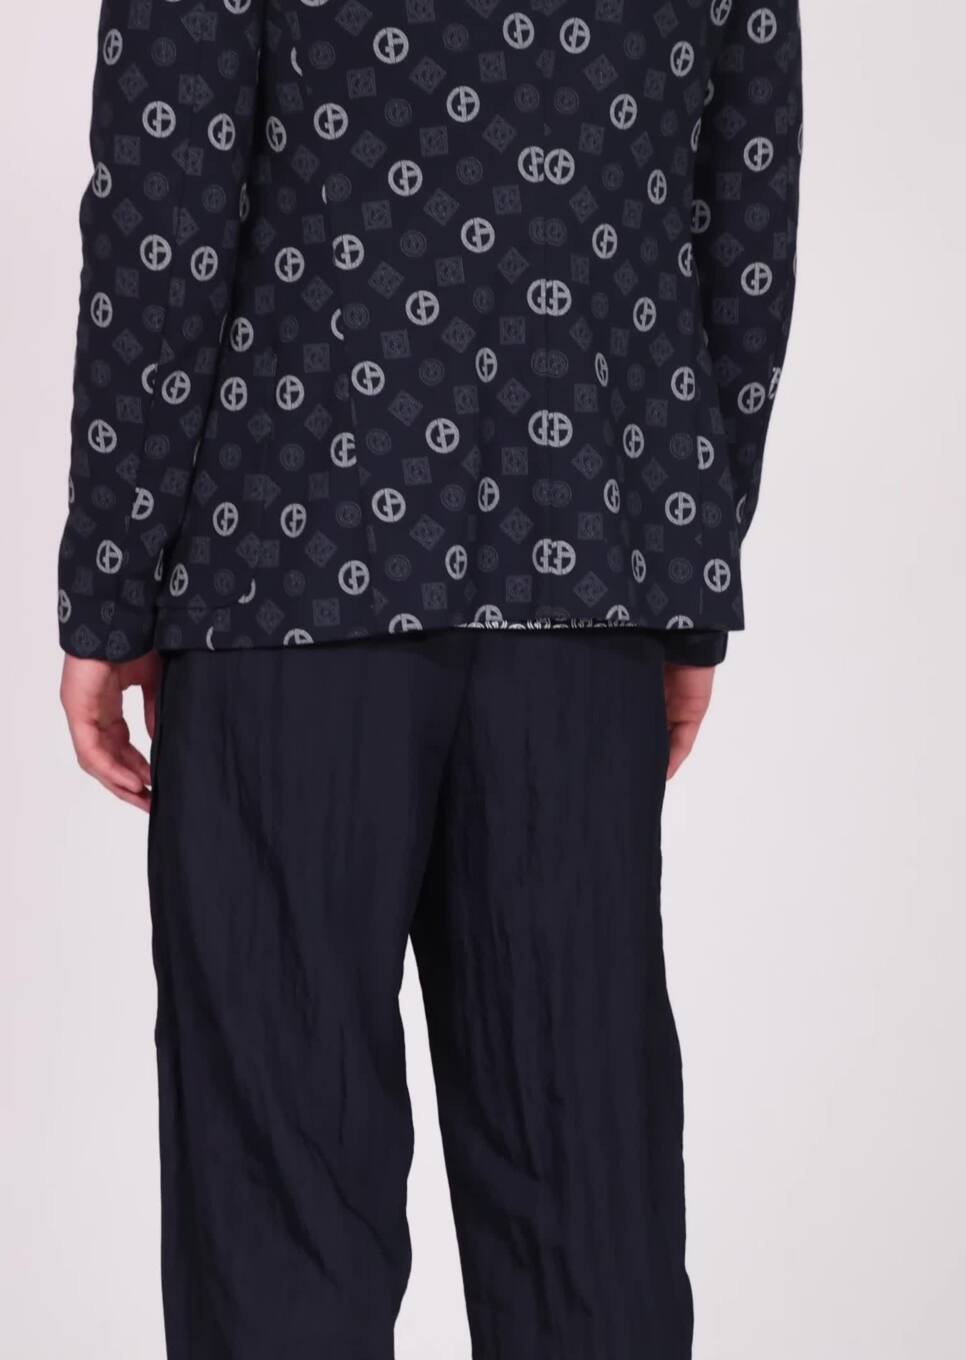 Travel Essentials trousers in a viscose jersey blend with ribs and